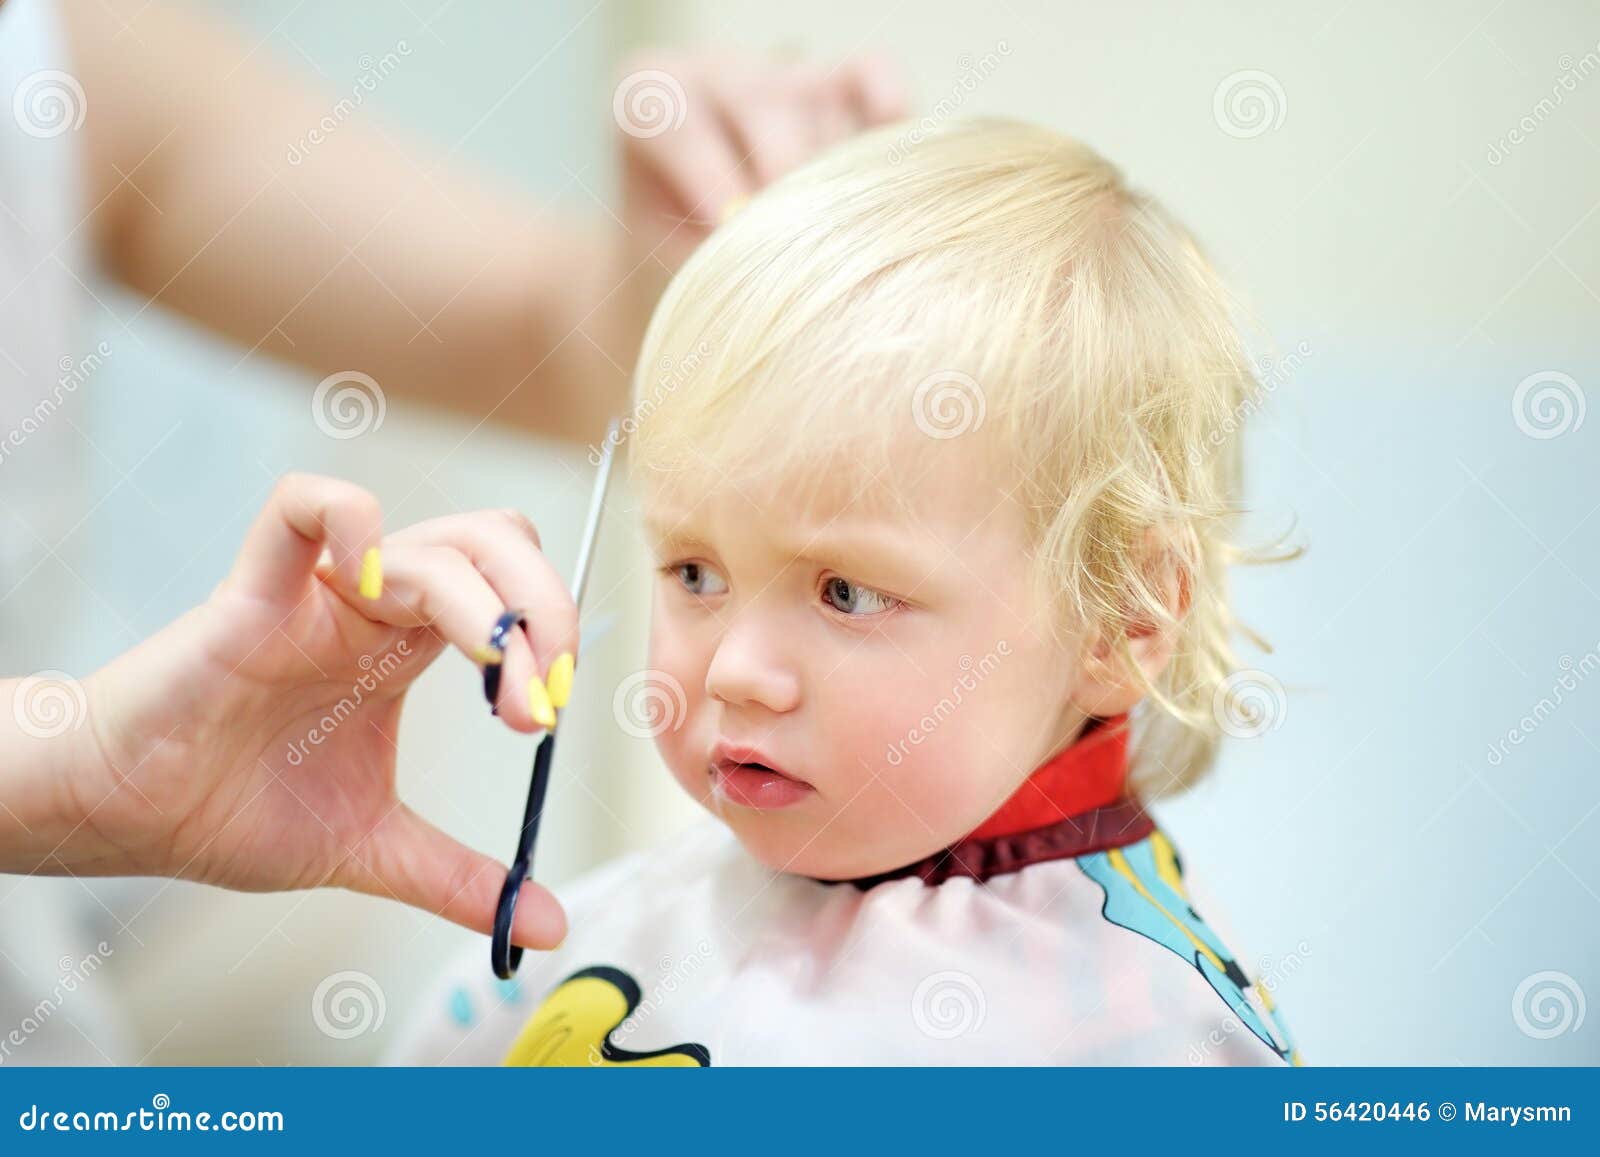 Toddler Child Getting His First Haircut Stock Photo Image Of